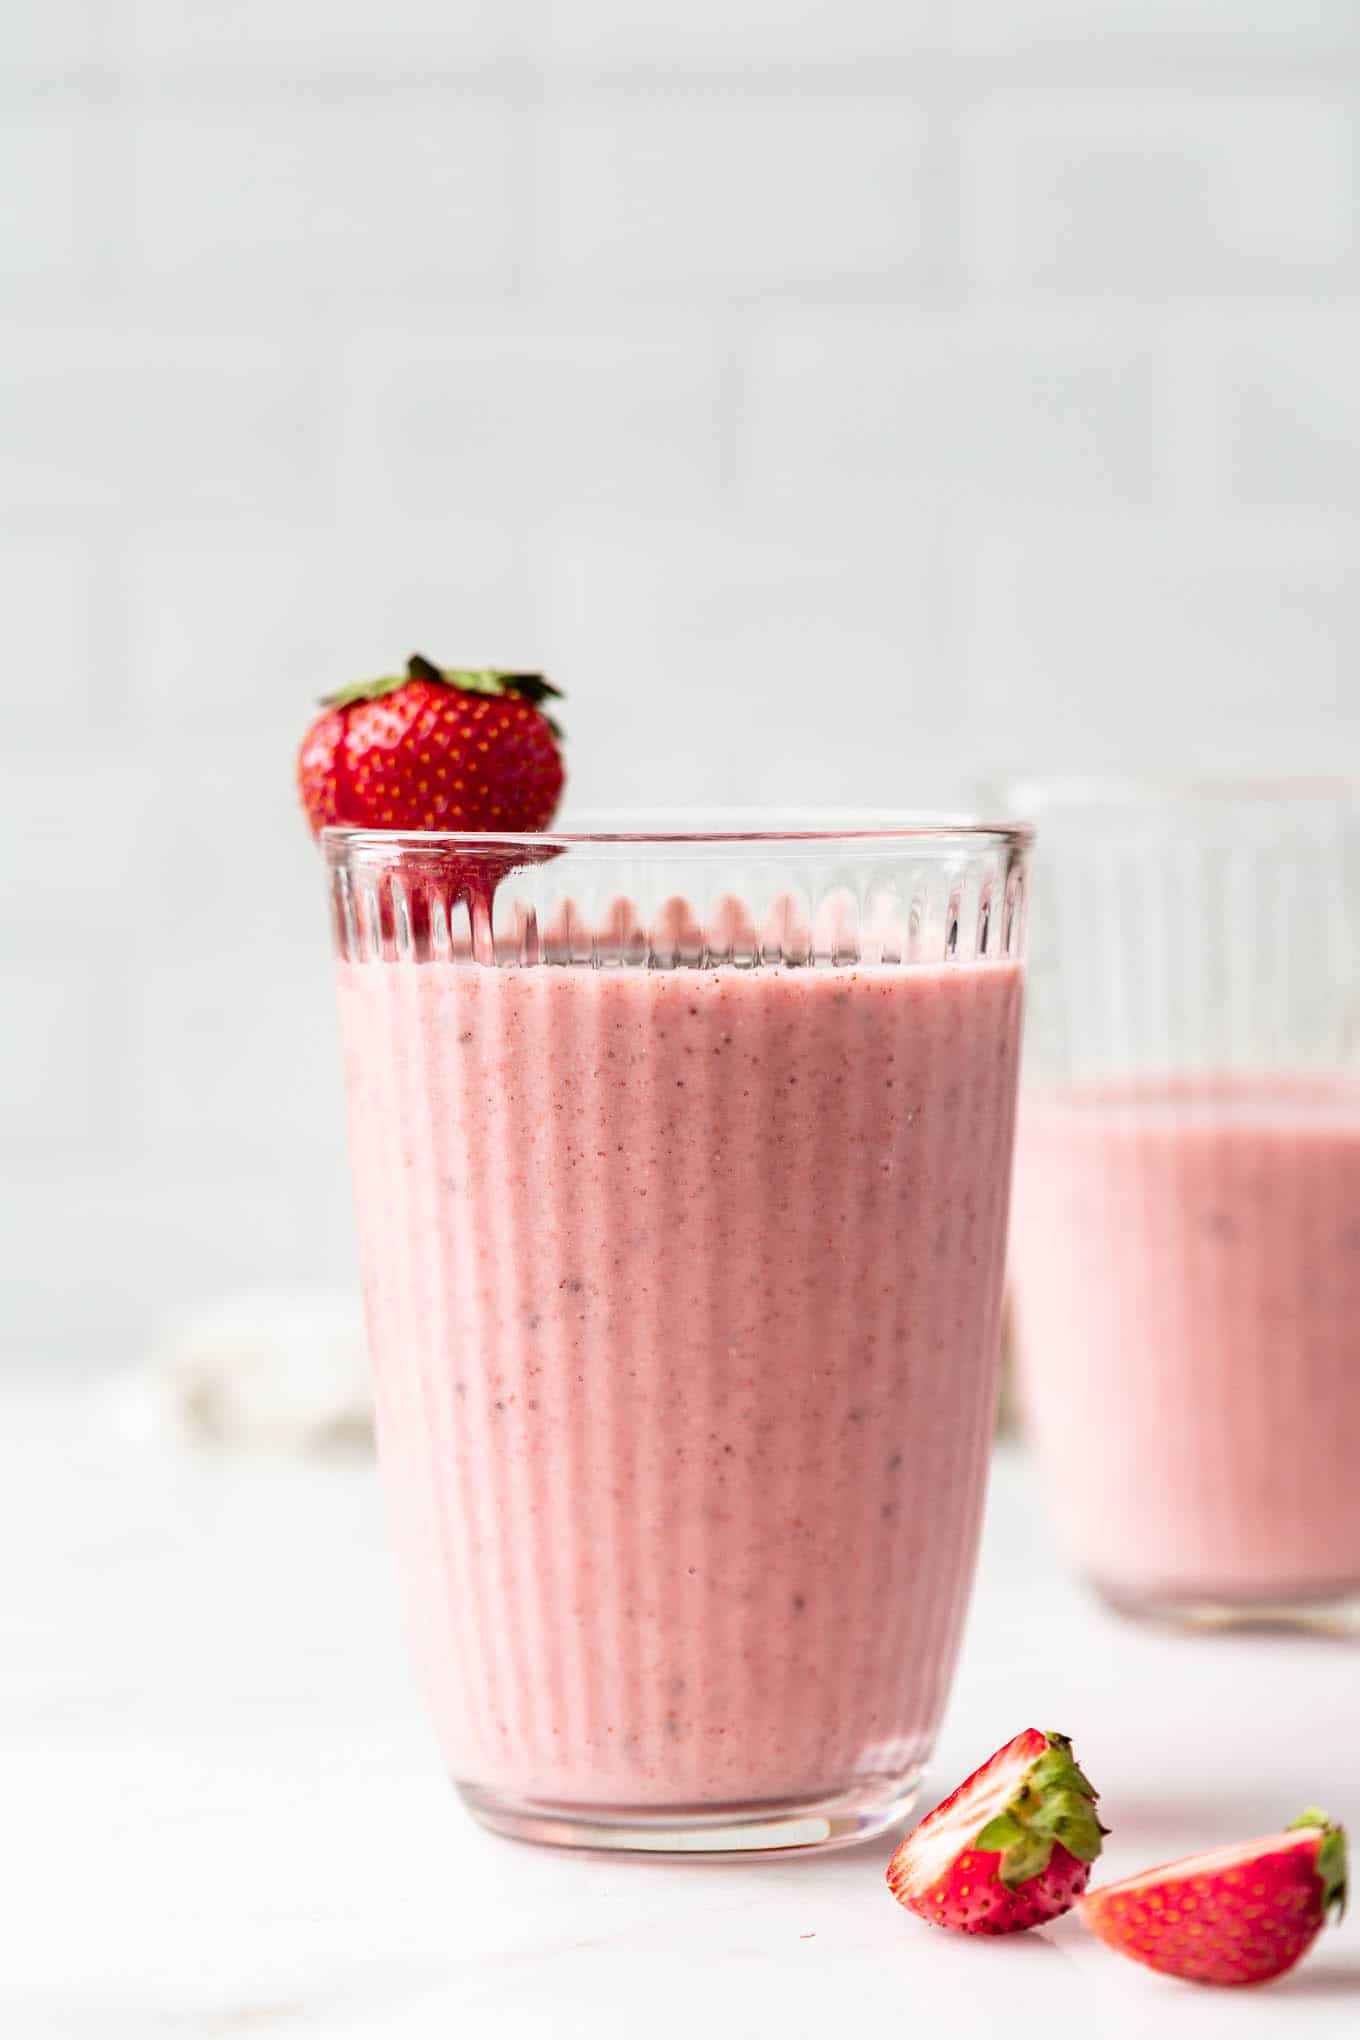 A strawberry chia seed smoothie in a glass